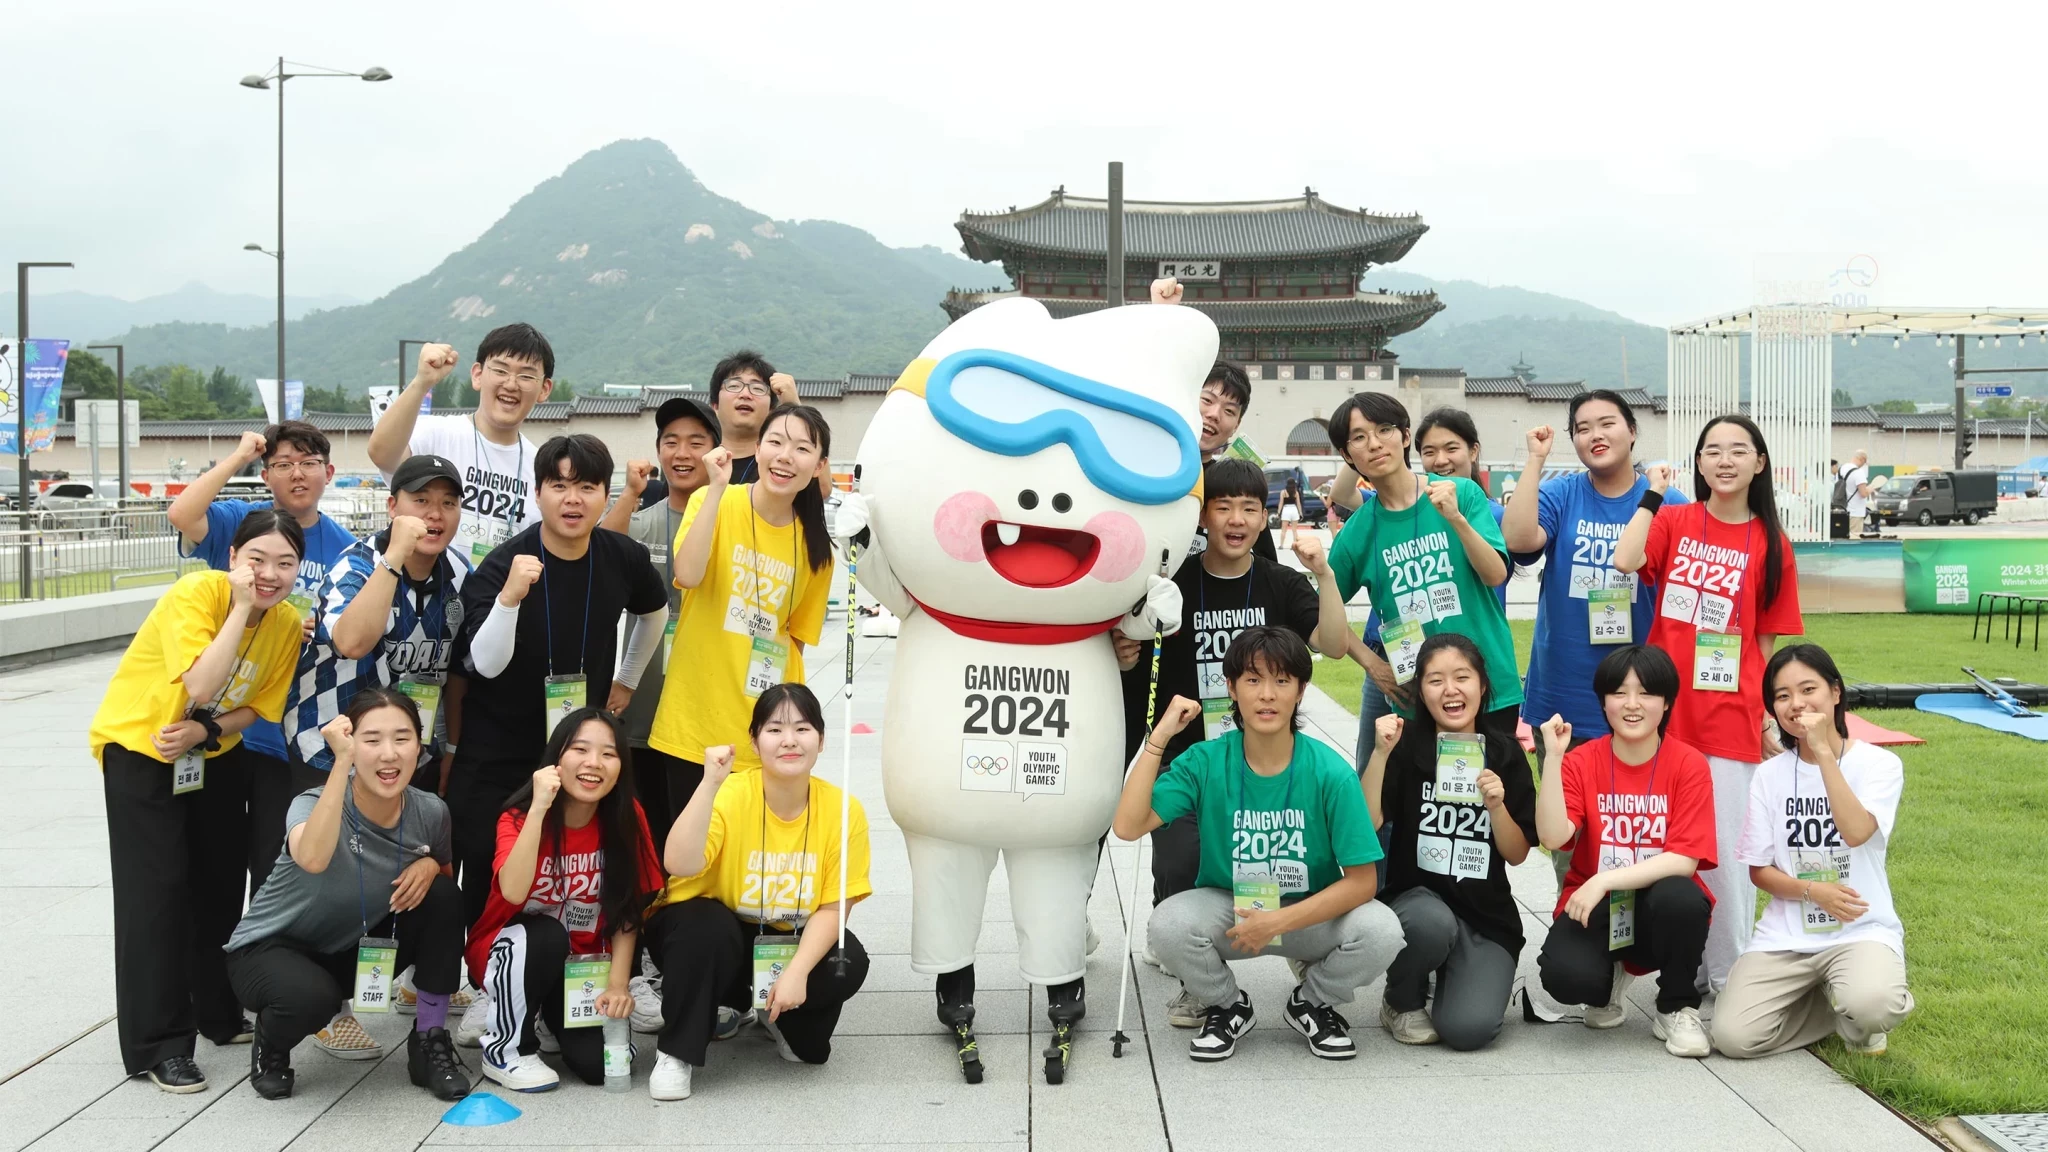 Gangwon 2024 initiatives for young people celebrated on International Youth Day